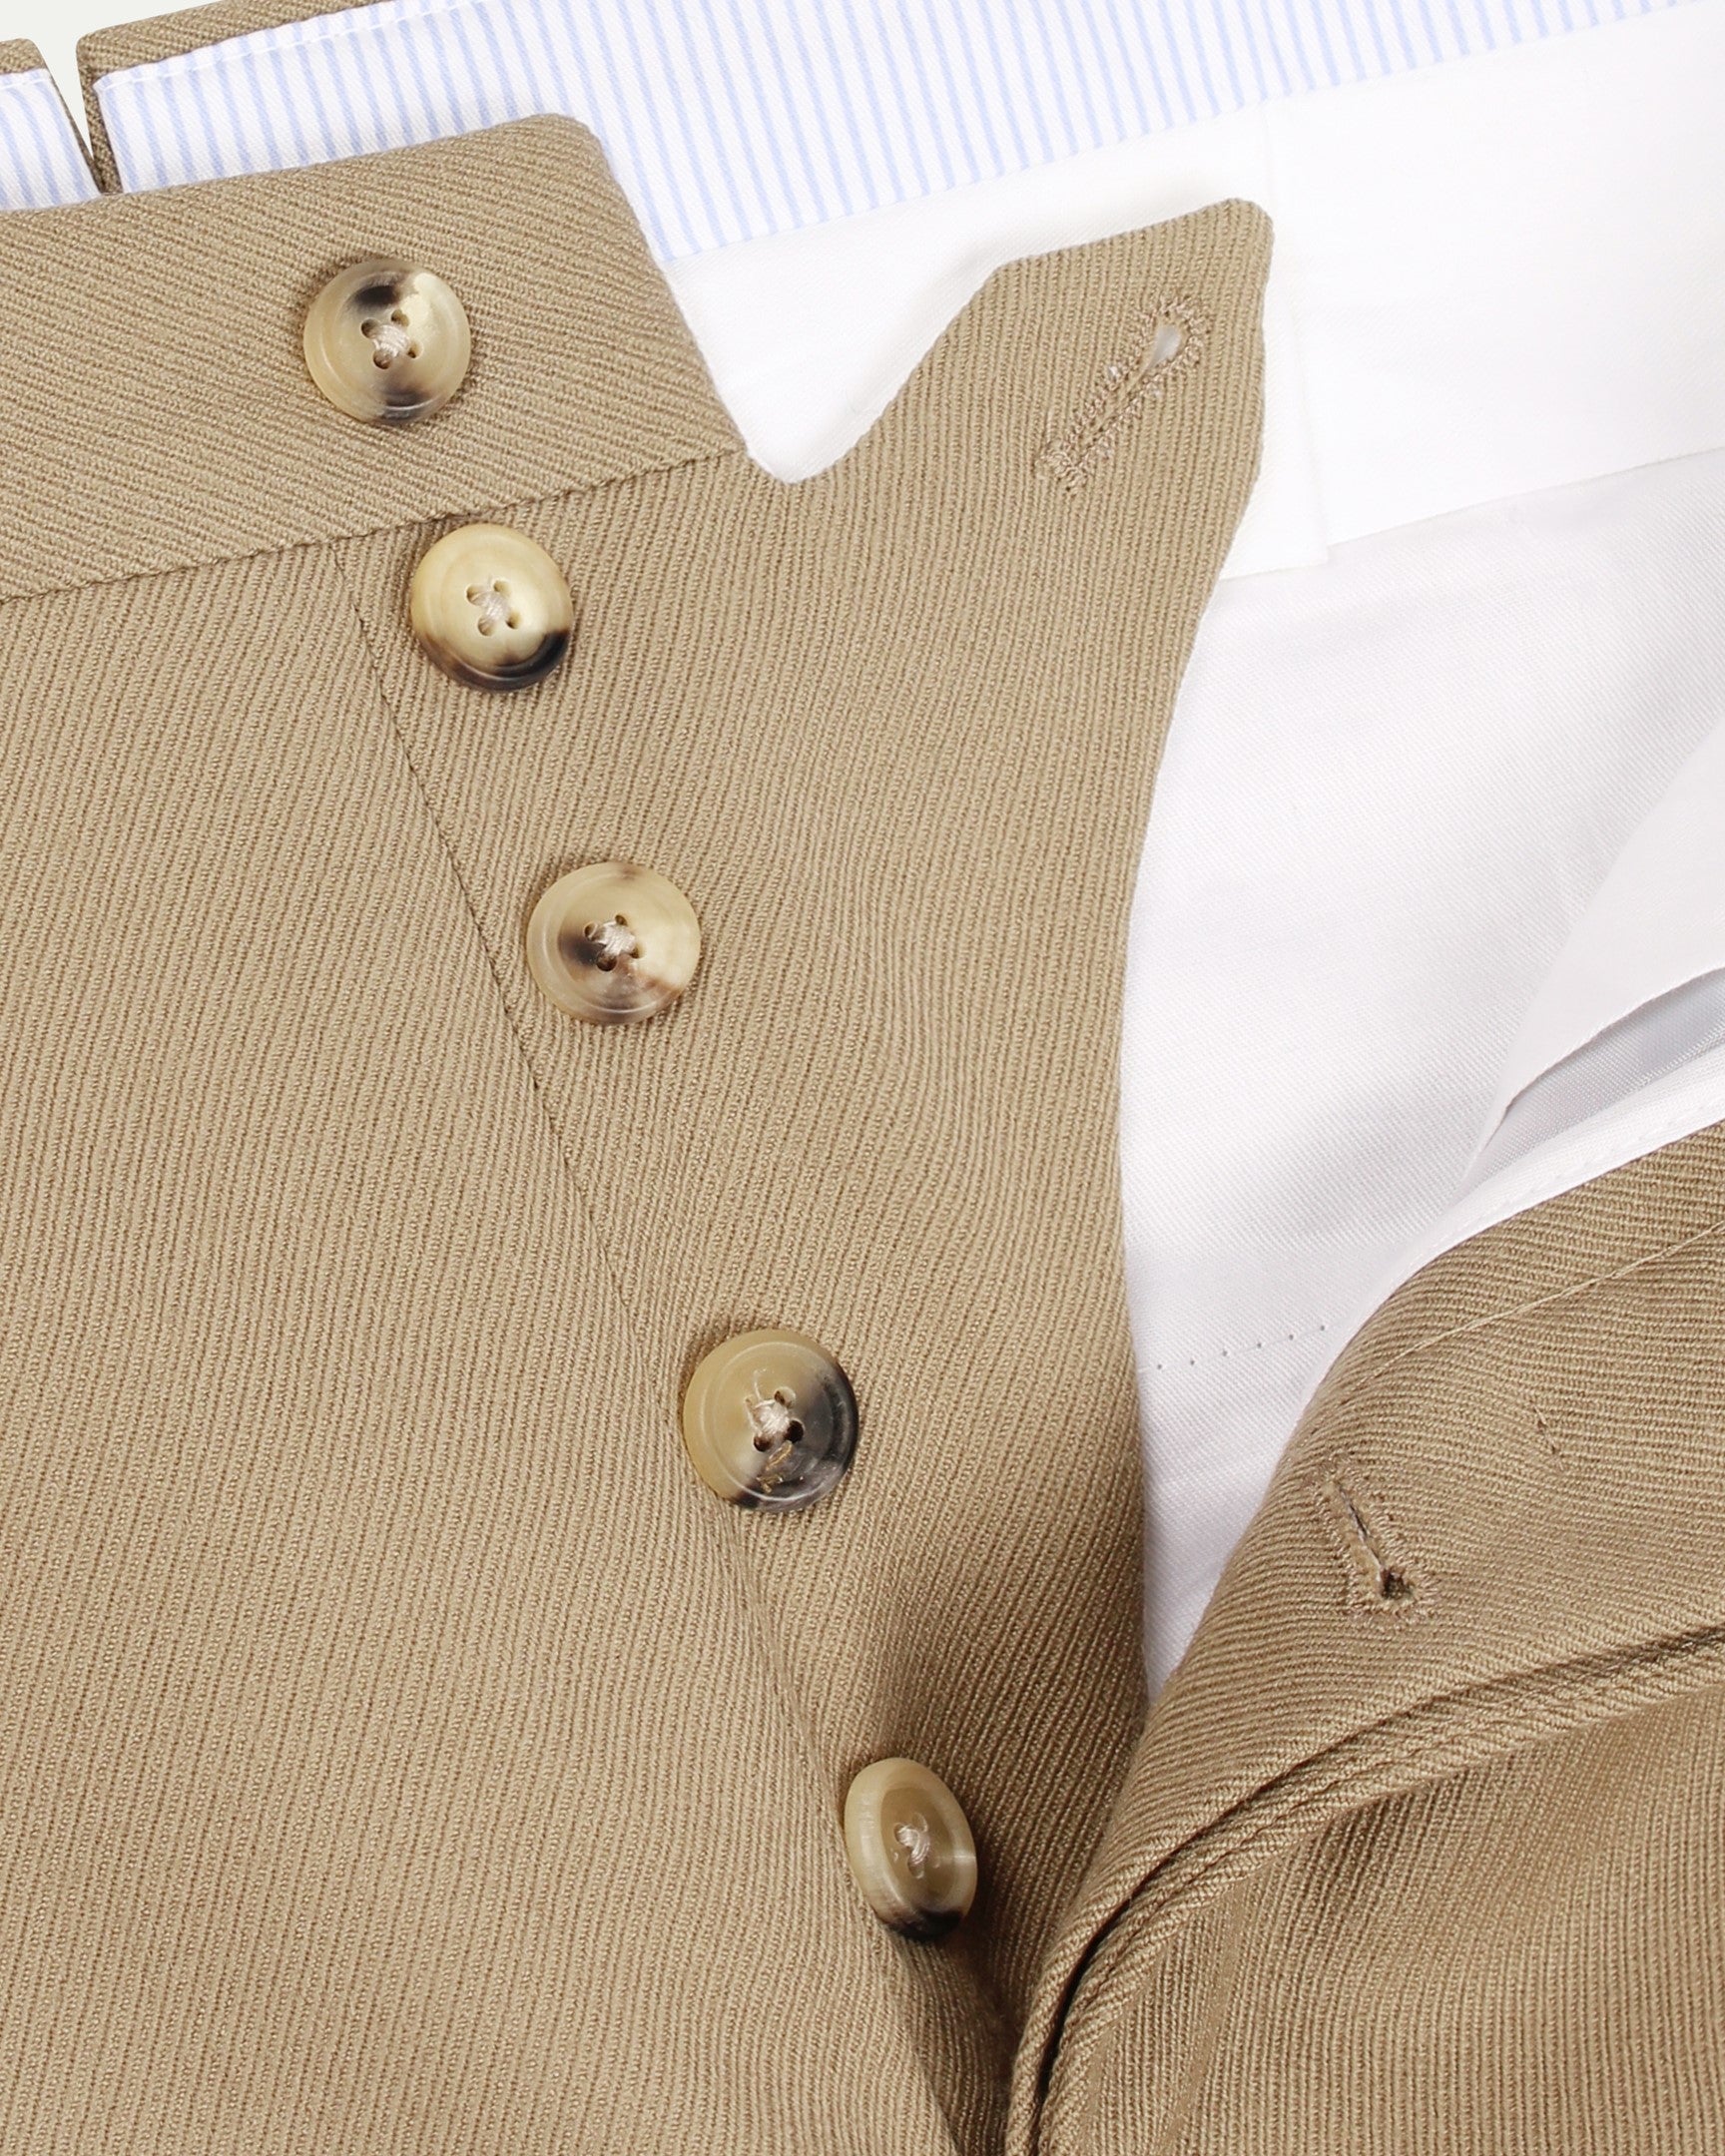 Made-To-Order Trousers in Beige Cavalry Twill